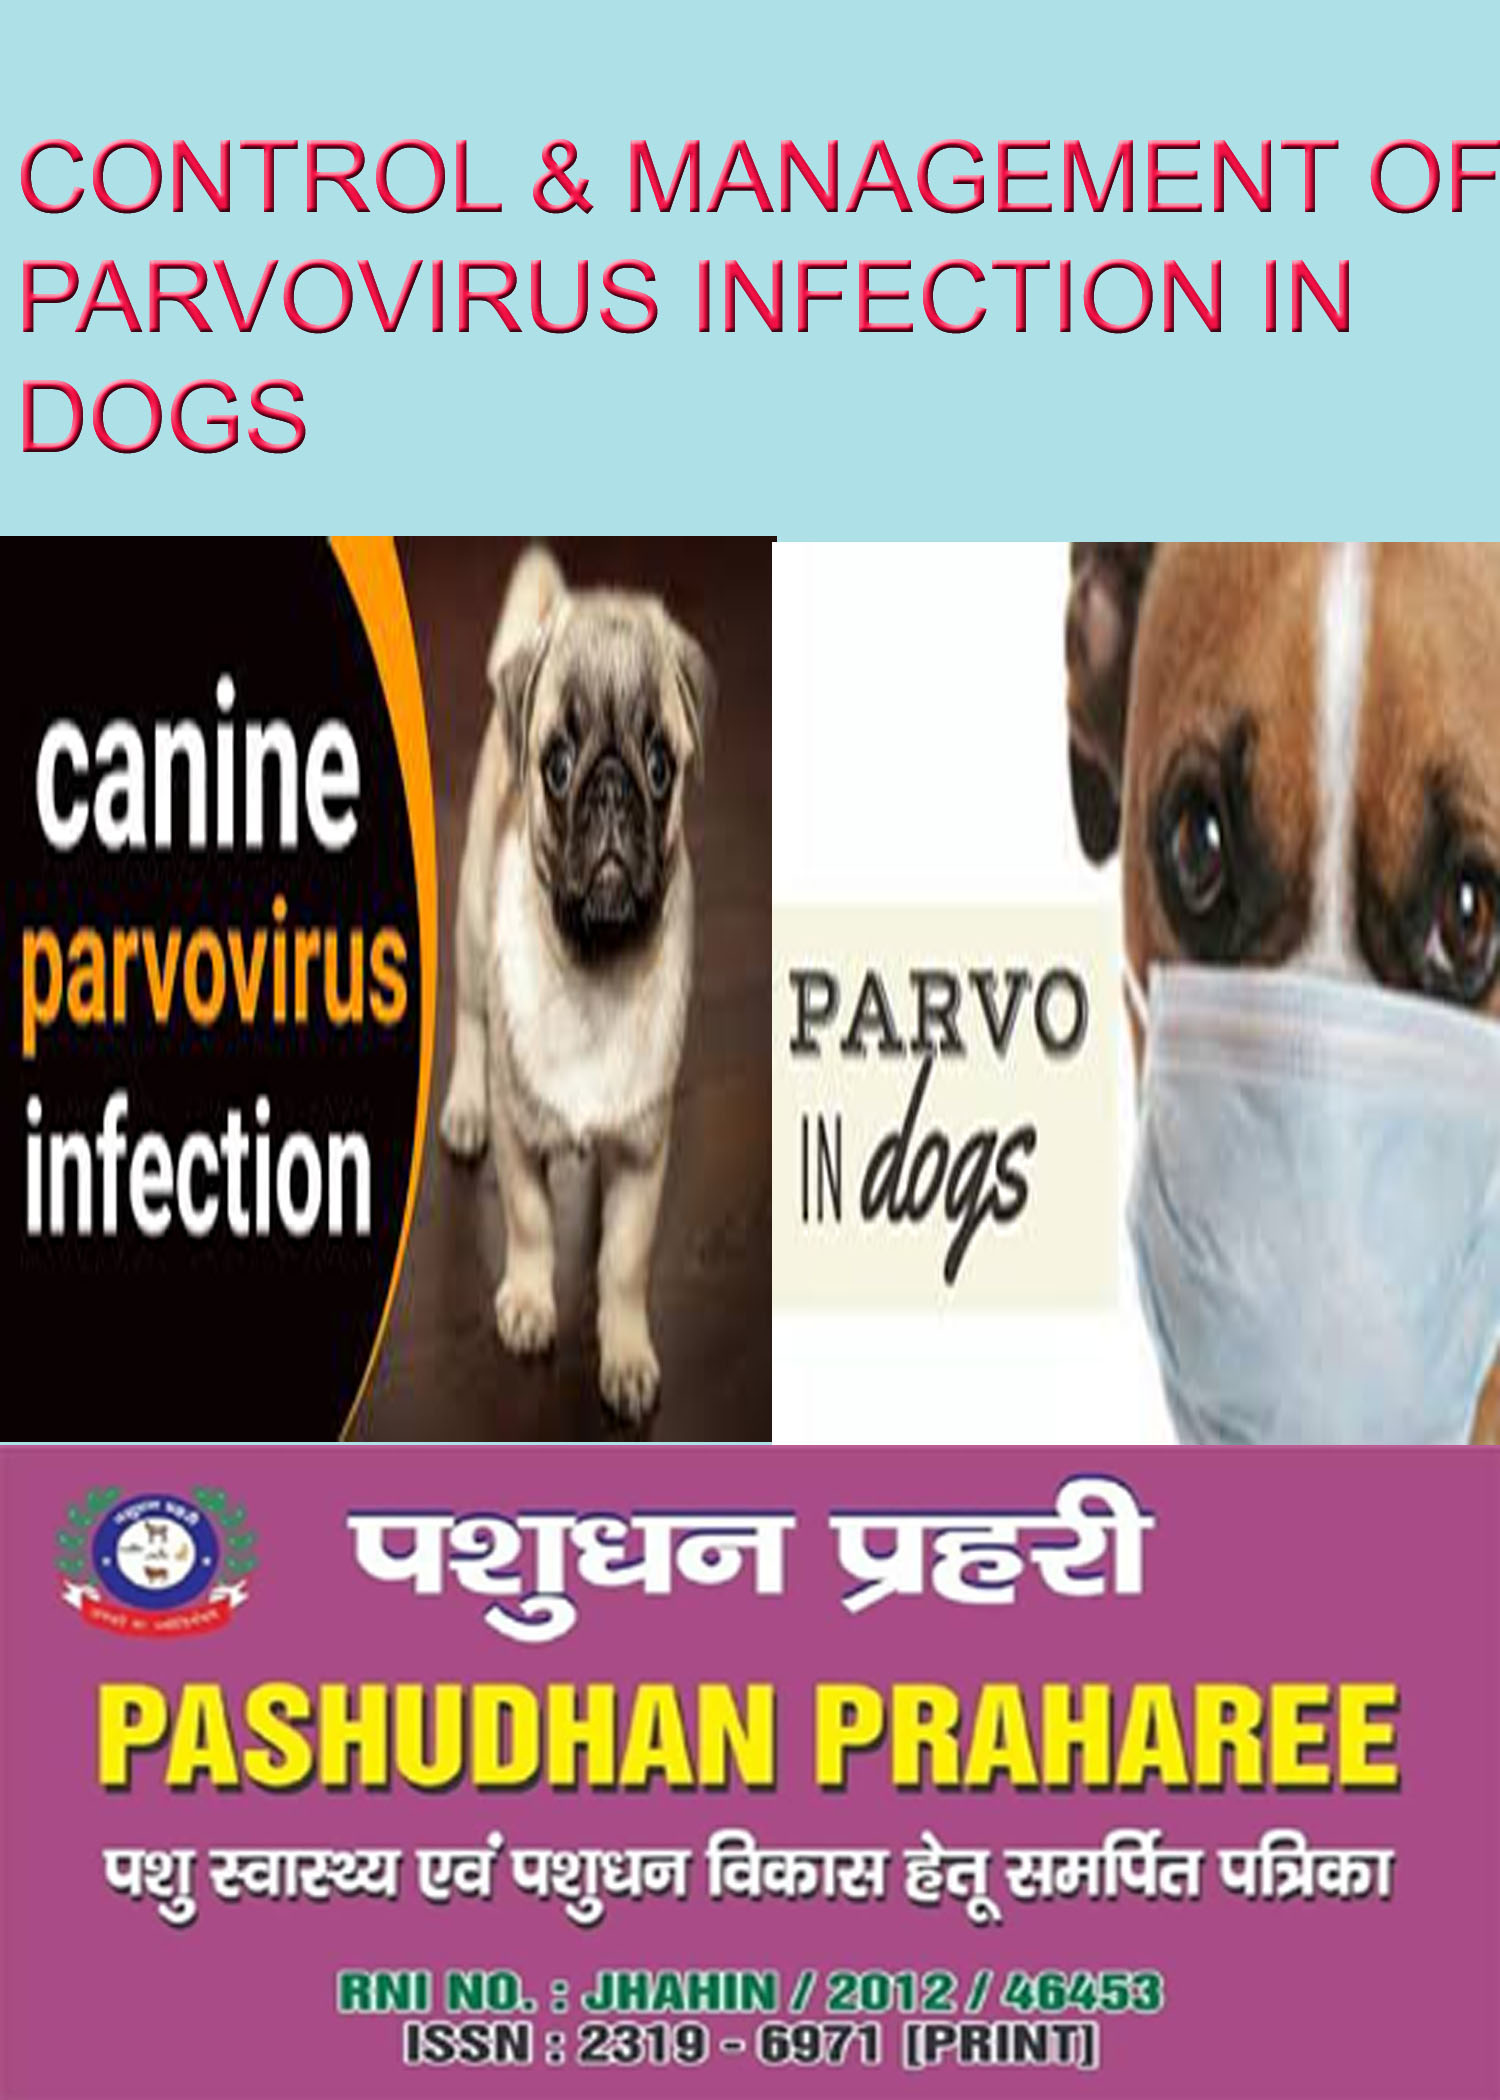 Control Management Of Parvovirus Infection In Dogs Pashudhan Praharee